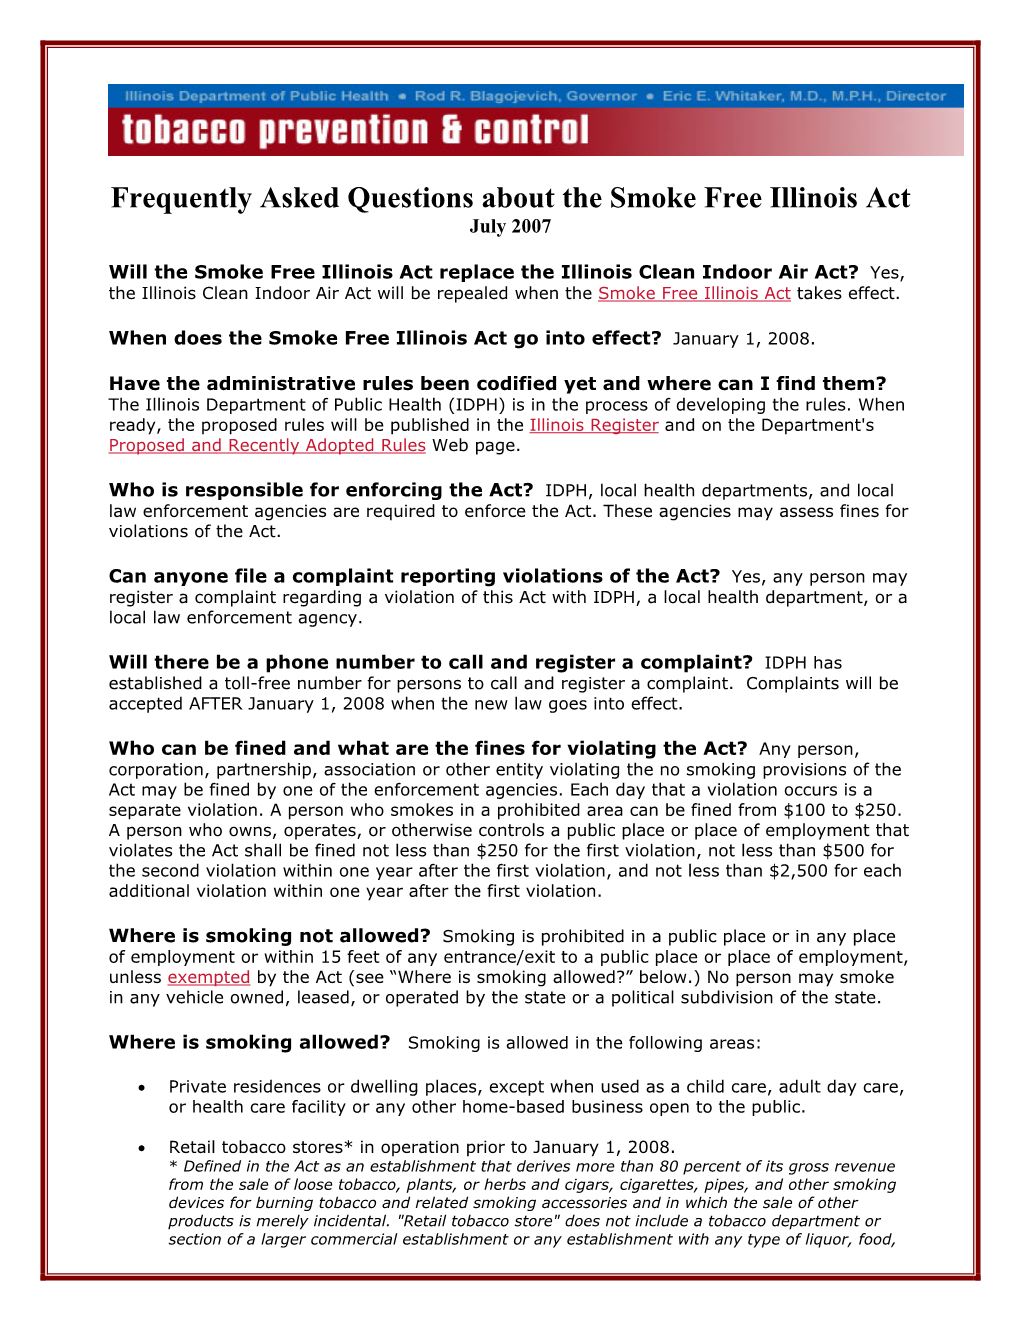 Frequently Asked Questions About the Smoke Free Illinois Act July 2007